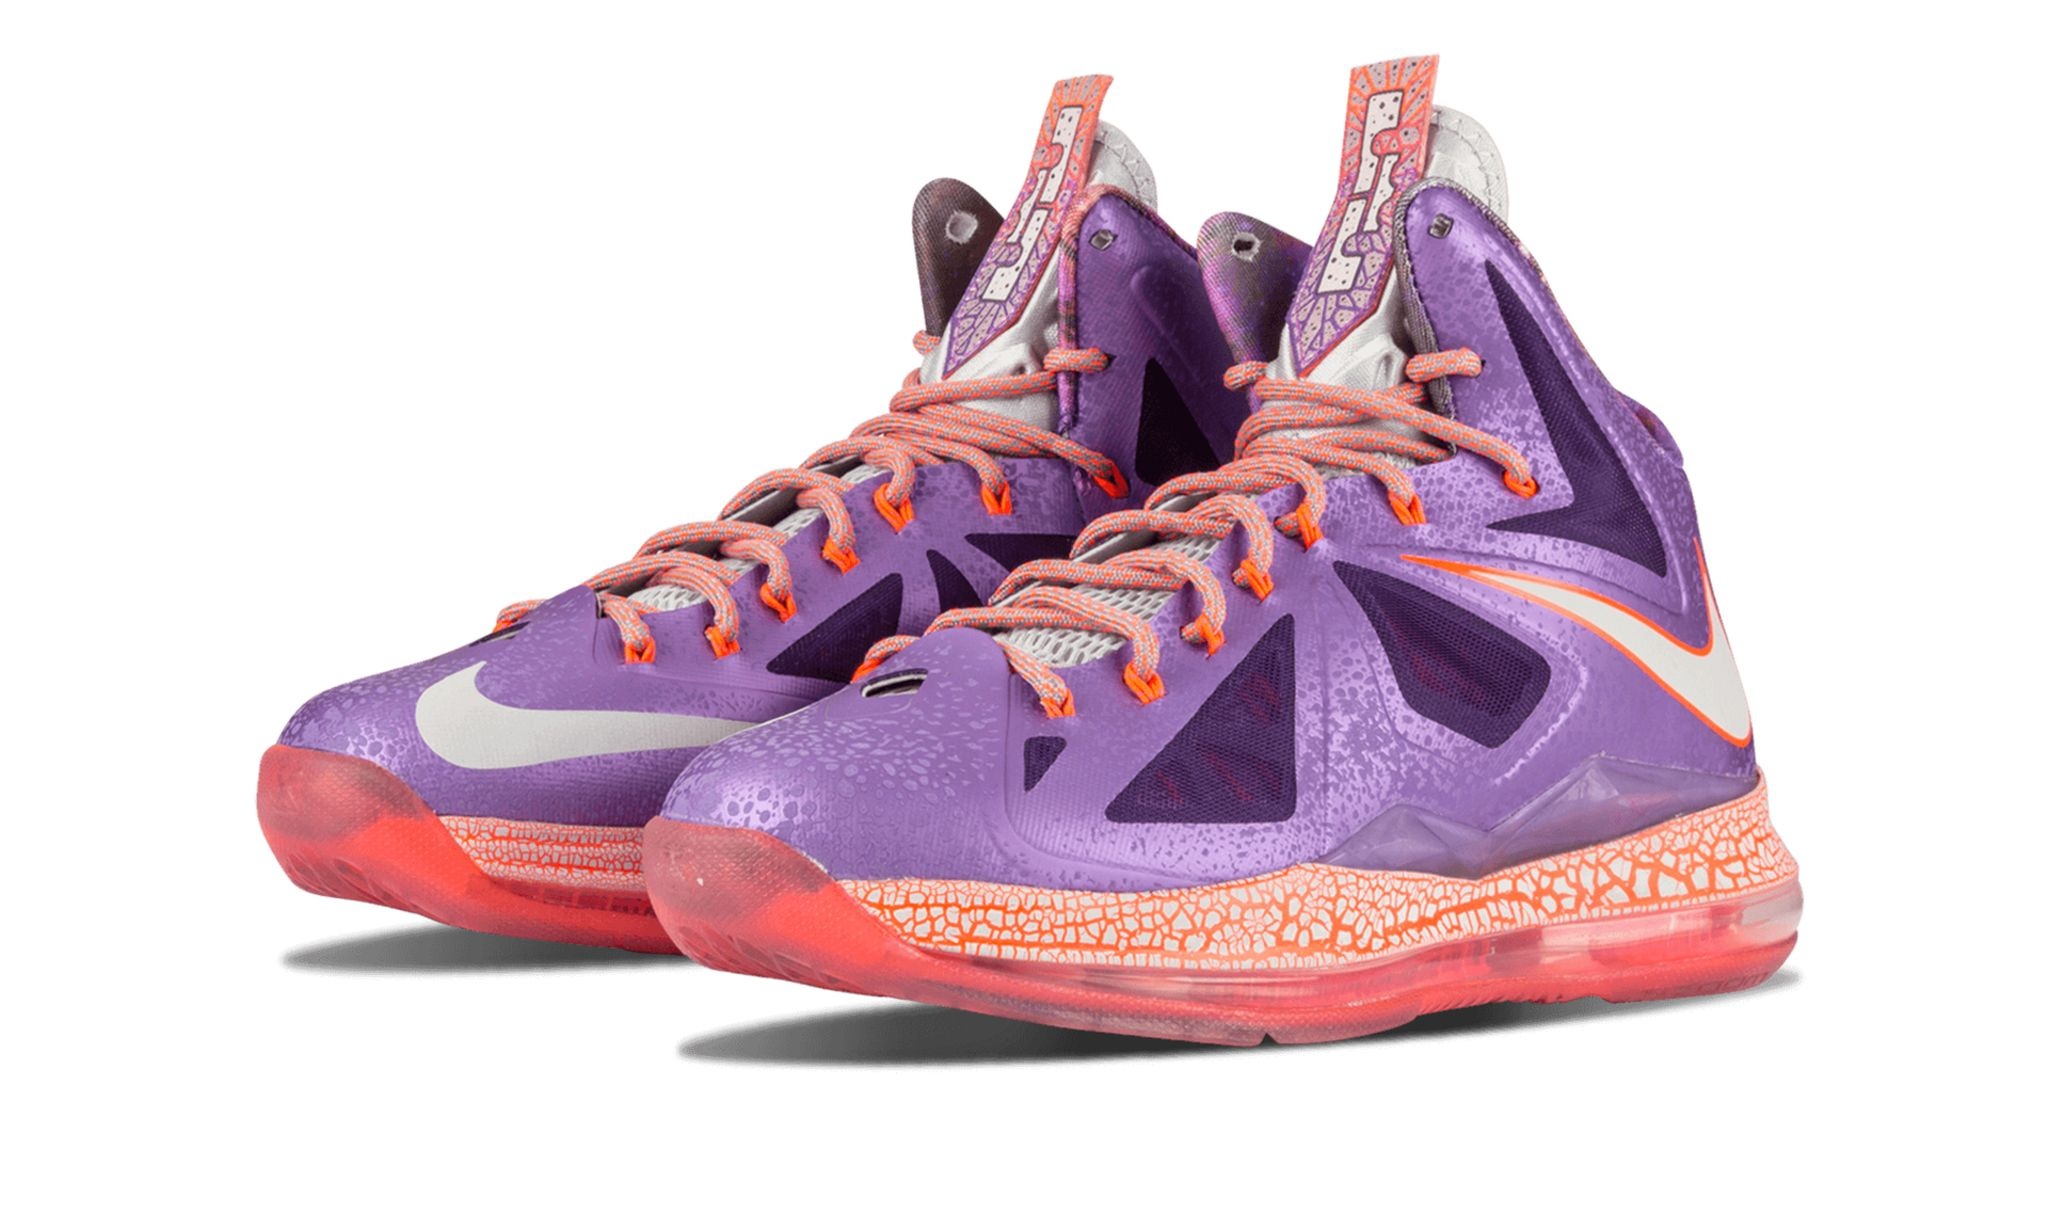 Lebron 10 - AS "Extraterrestrial" - 2